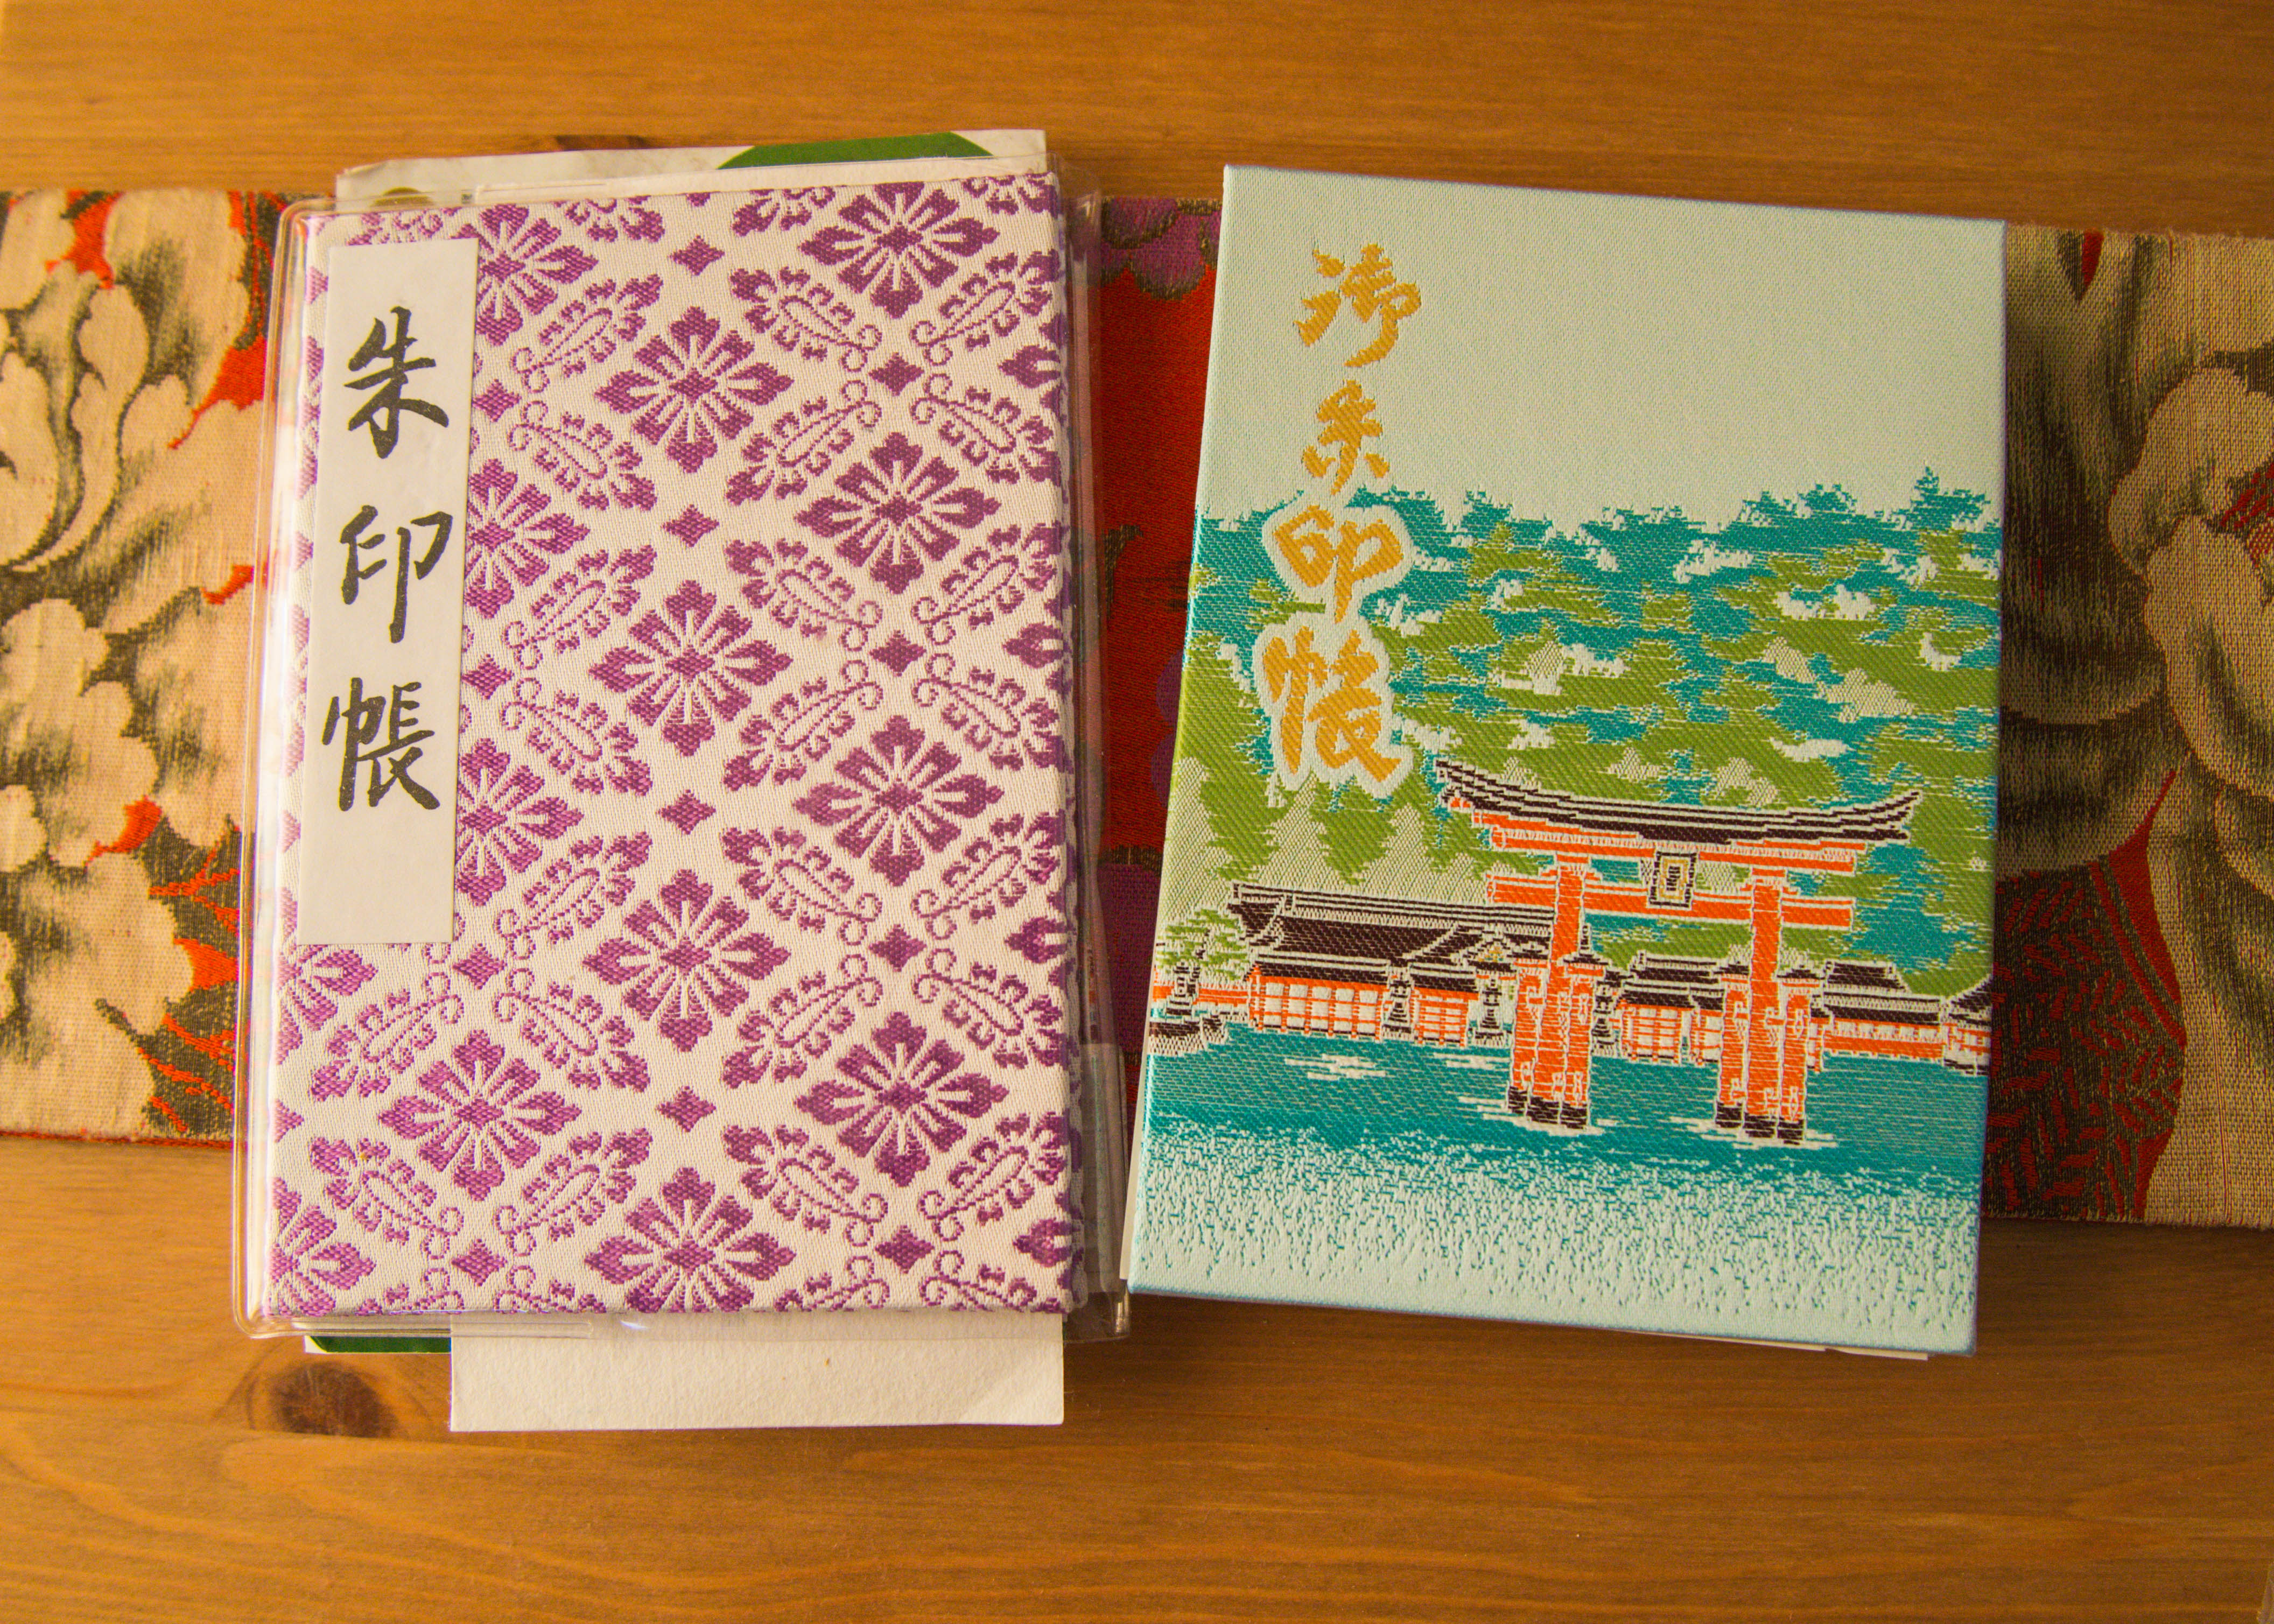 My Temple and Shrine Stamp Book, or Shuin-cho